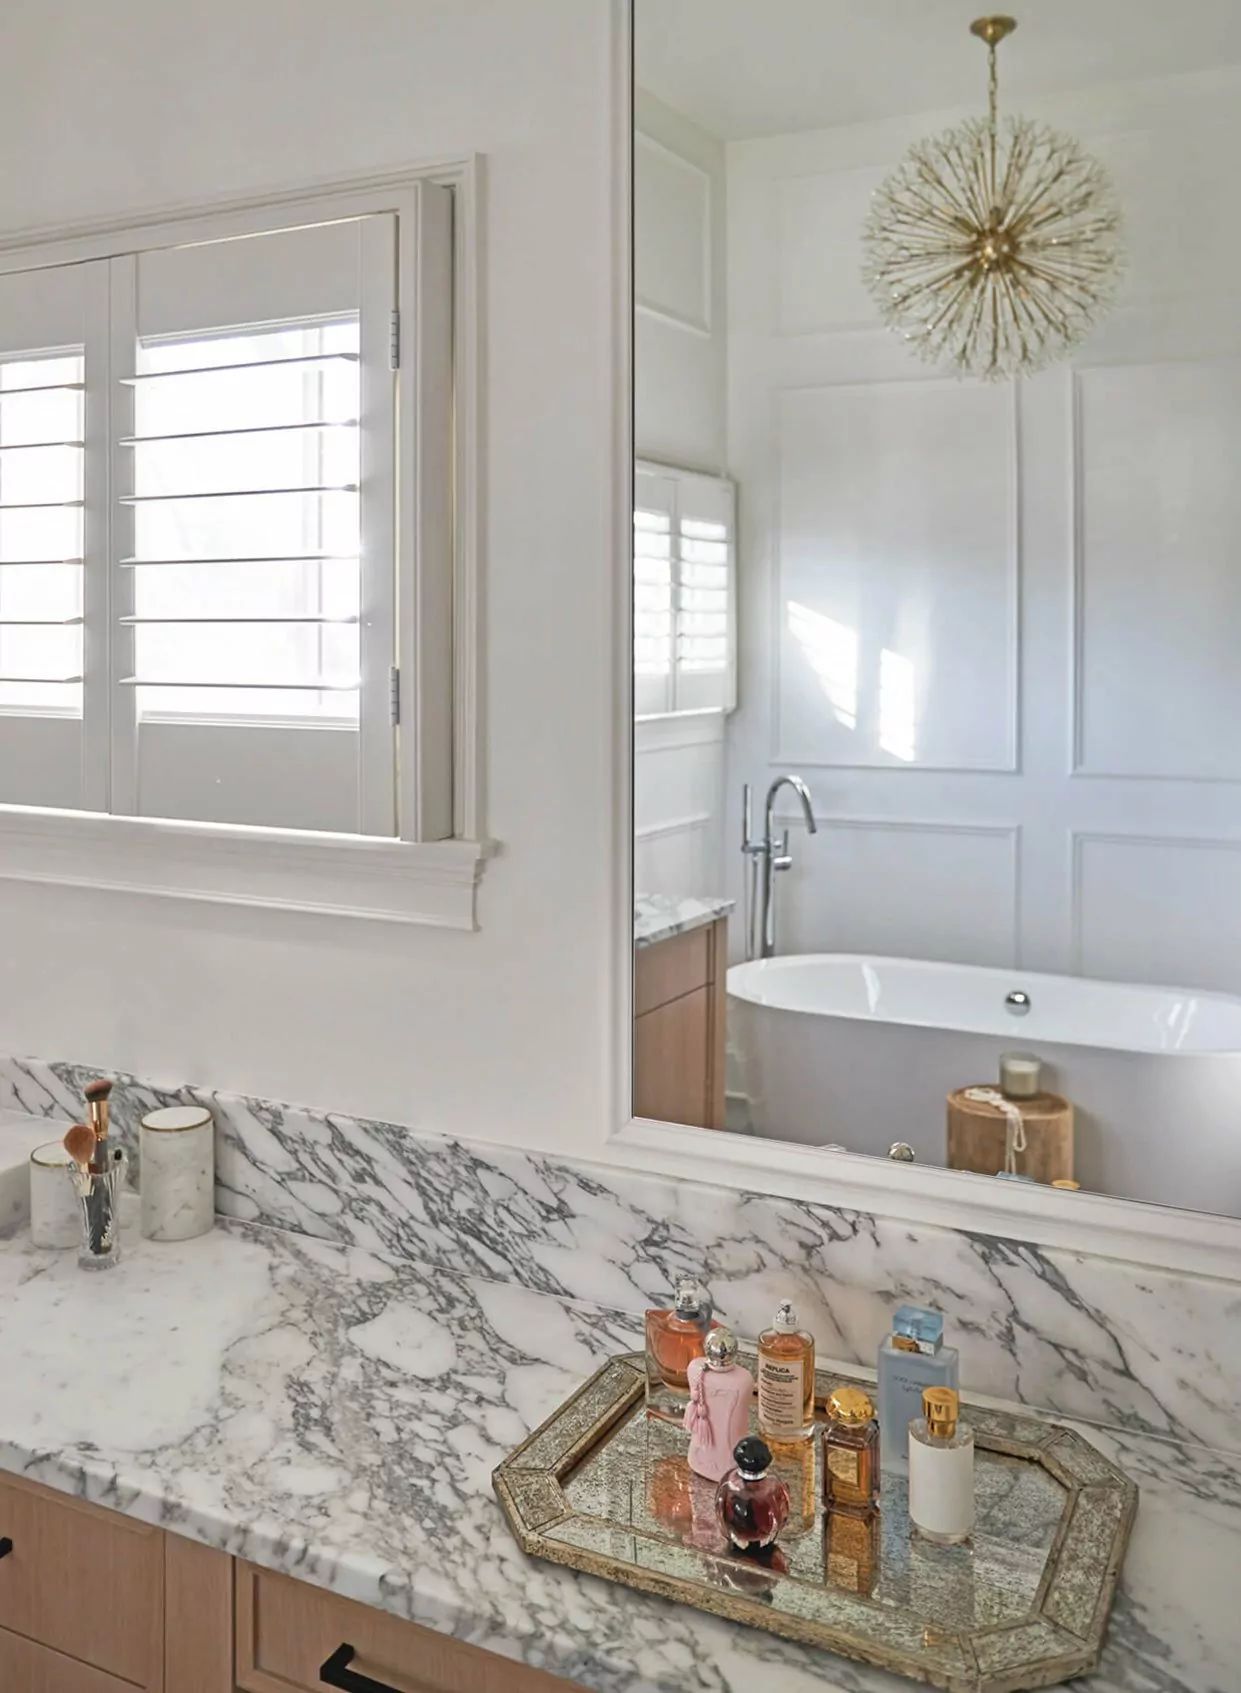 A Glen Ellyn Bathroom Remodel with Marble and Brass